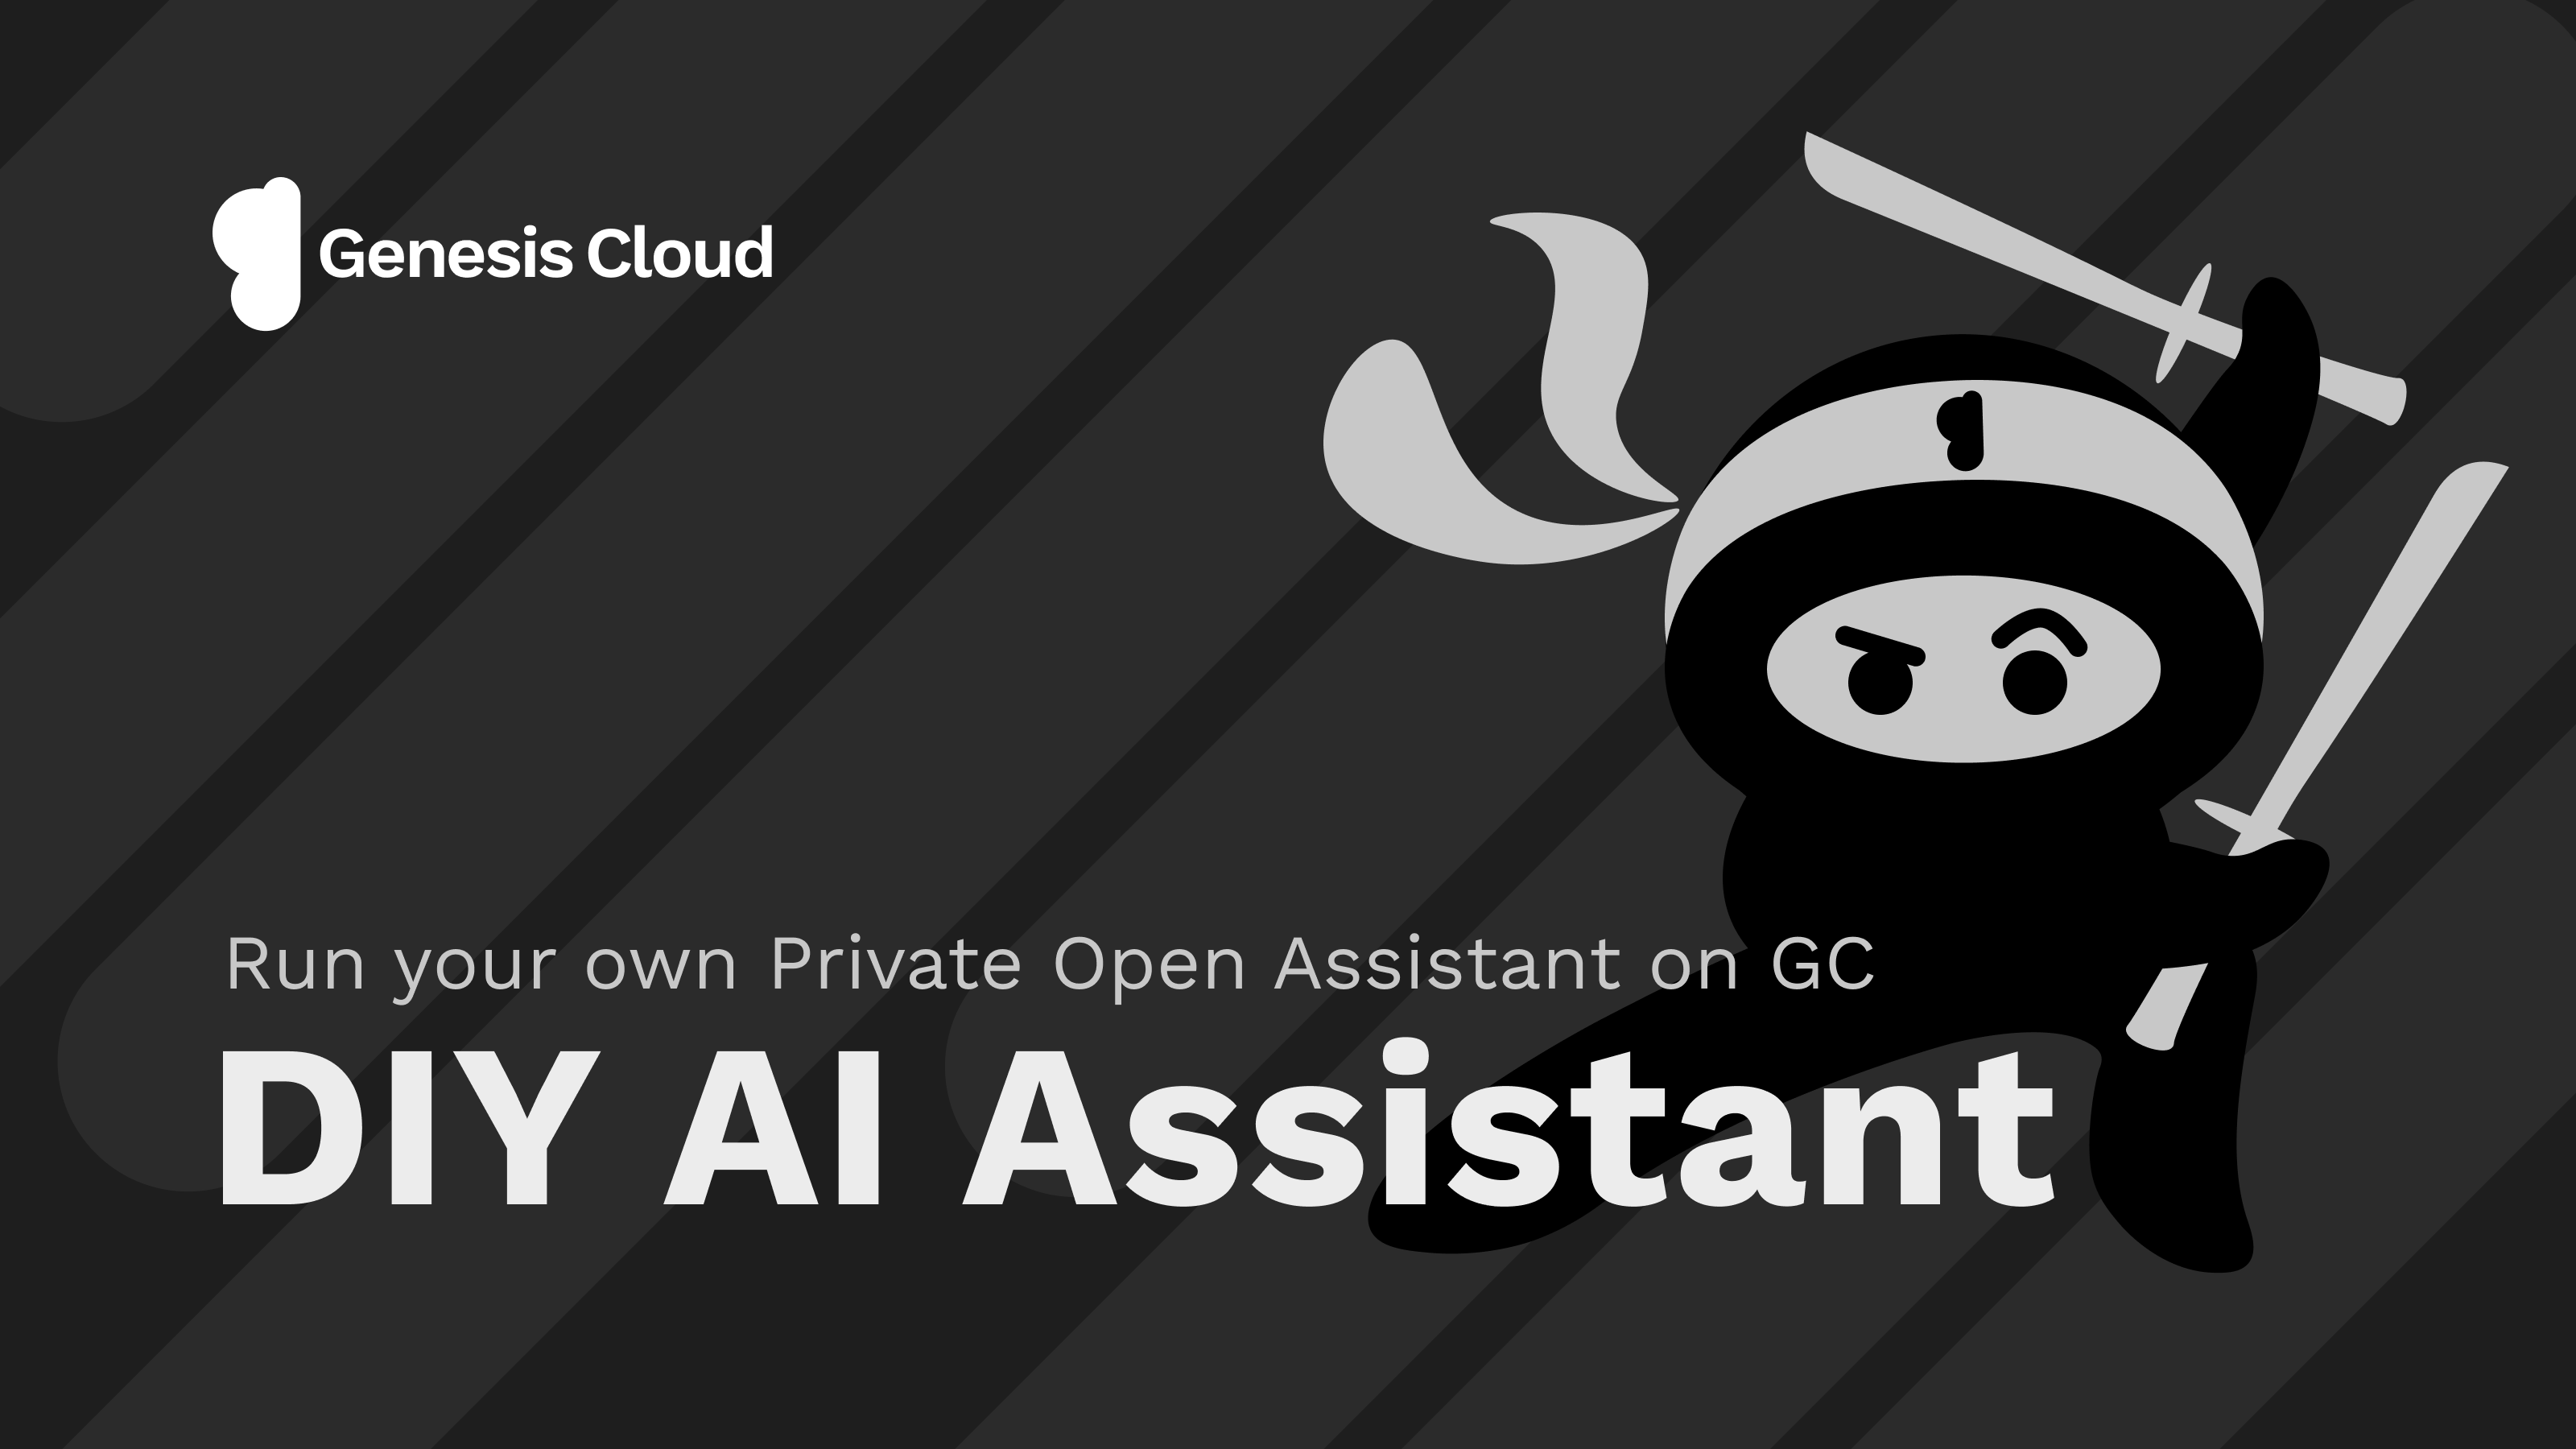 DIY AI Assistant: A Guide to Running Your Own Private Open Assistant on Genesis Cloud